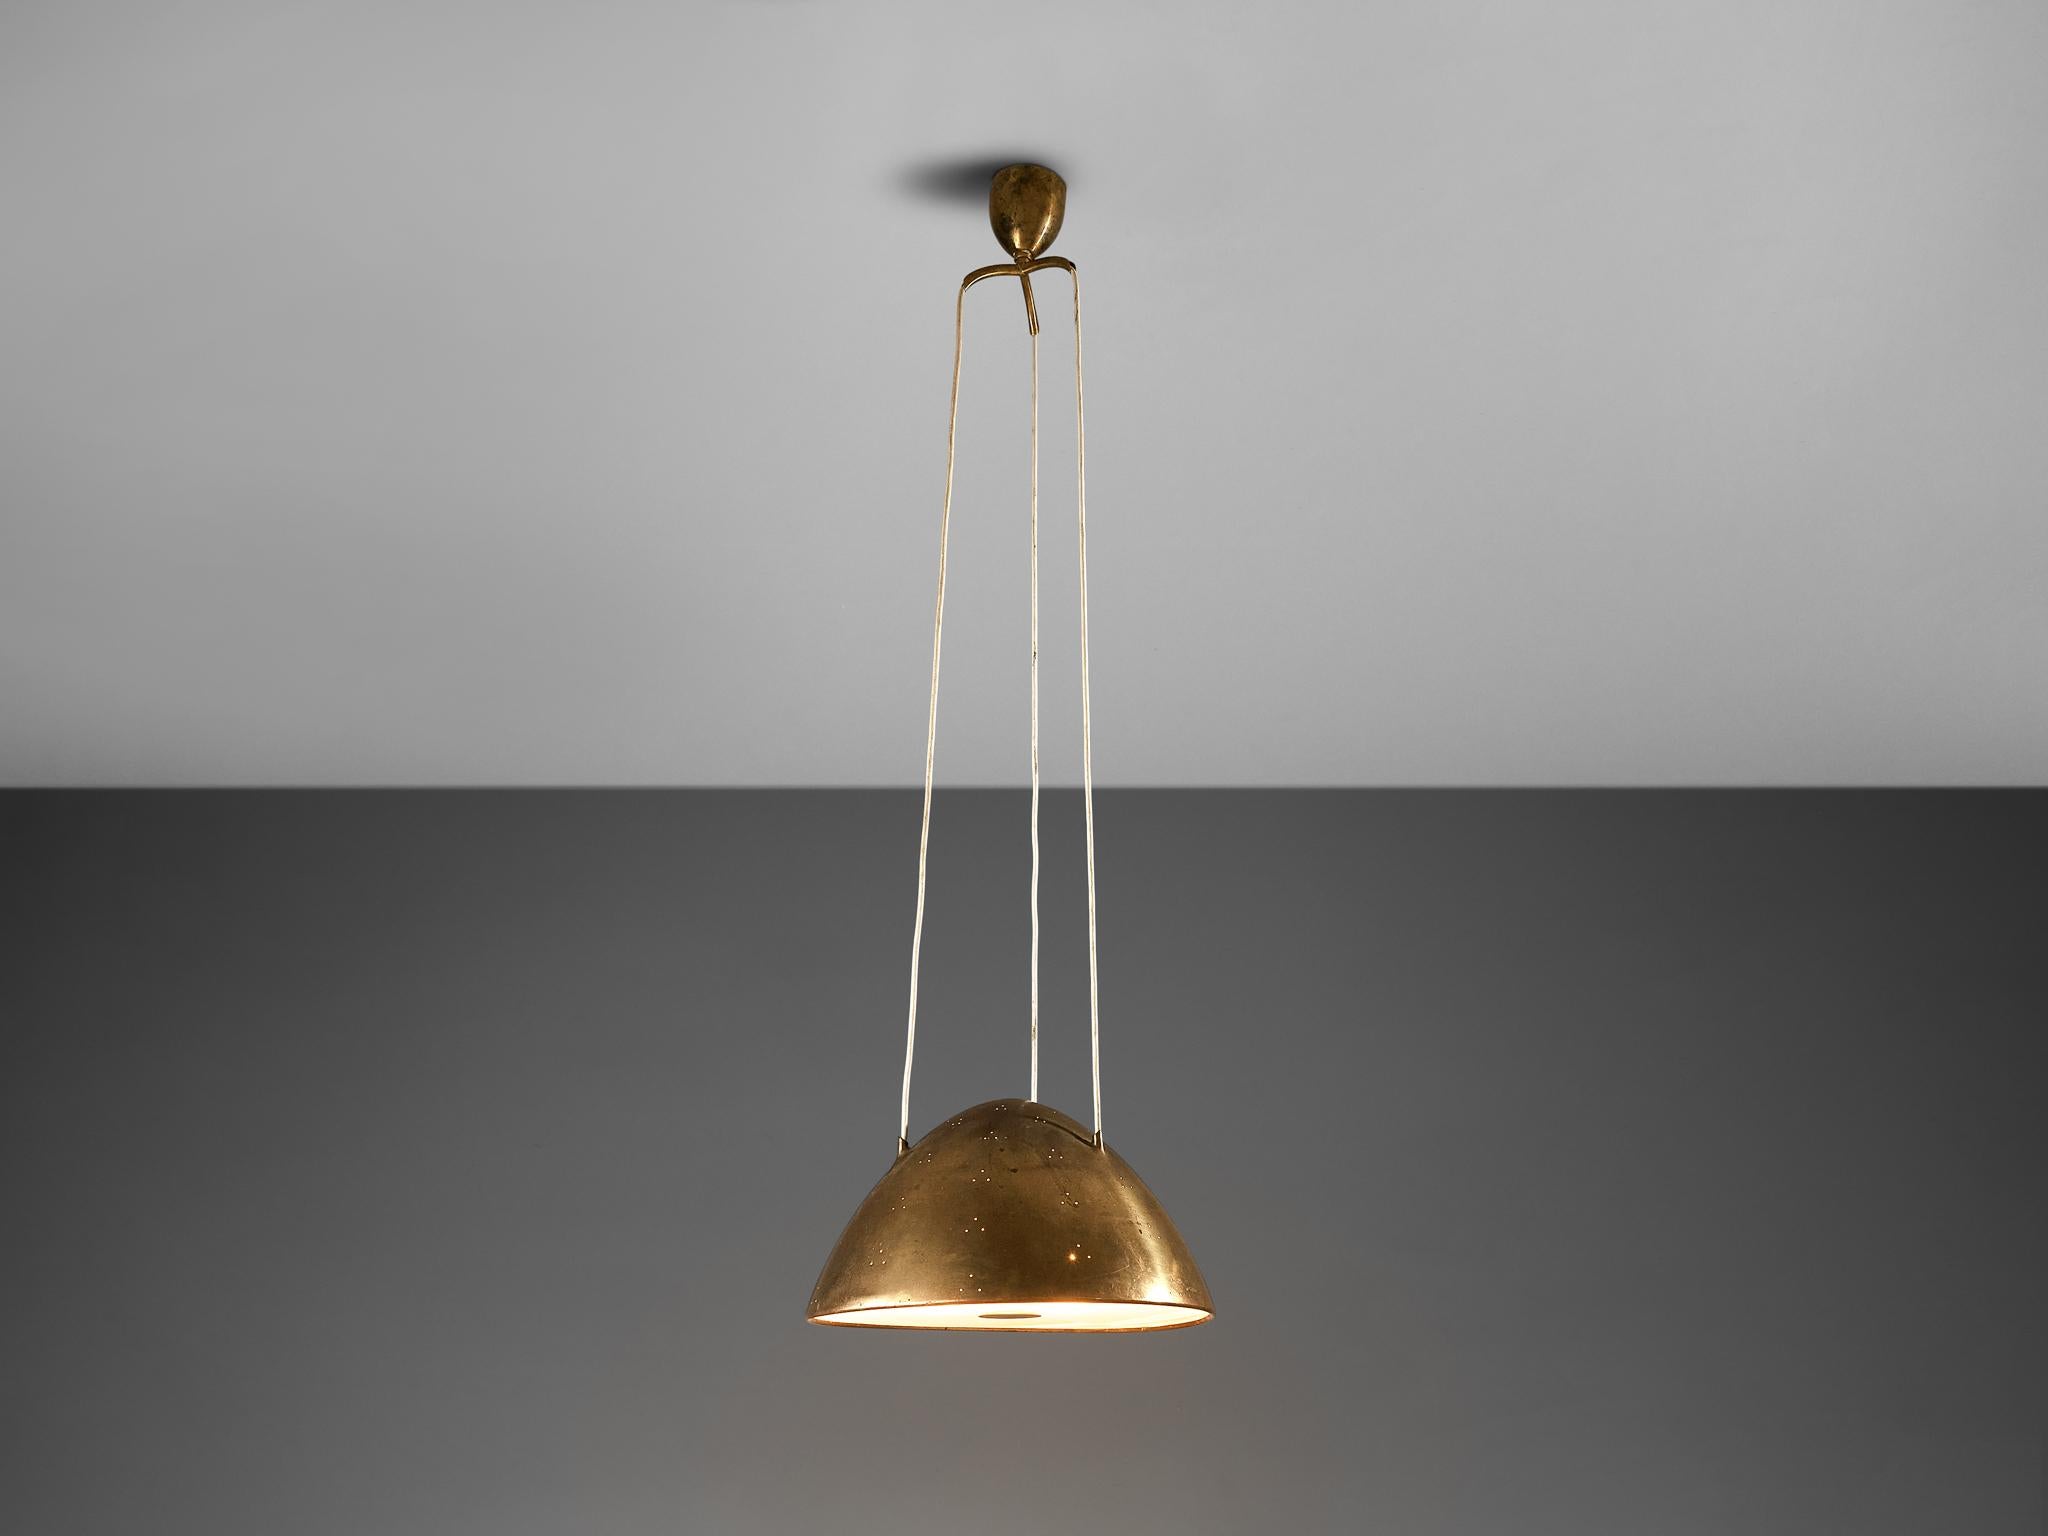 Paavo Tynell for Taito Oy, pendant lamp model 1959, brass, glass, Finland, 1950s.

Eccentric dome-shaped pendant lamp designed by Paavo Tynell, the Finnish design master of lighting. The model ‘1959’ features all characteristics of Tynell’s